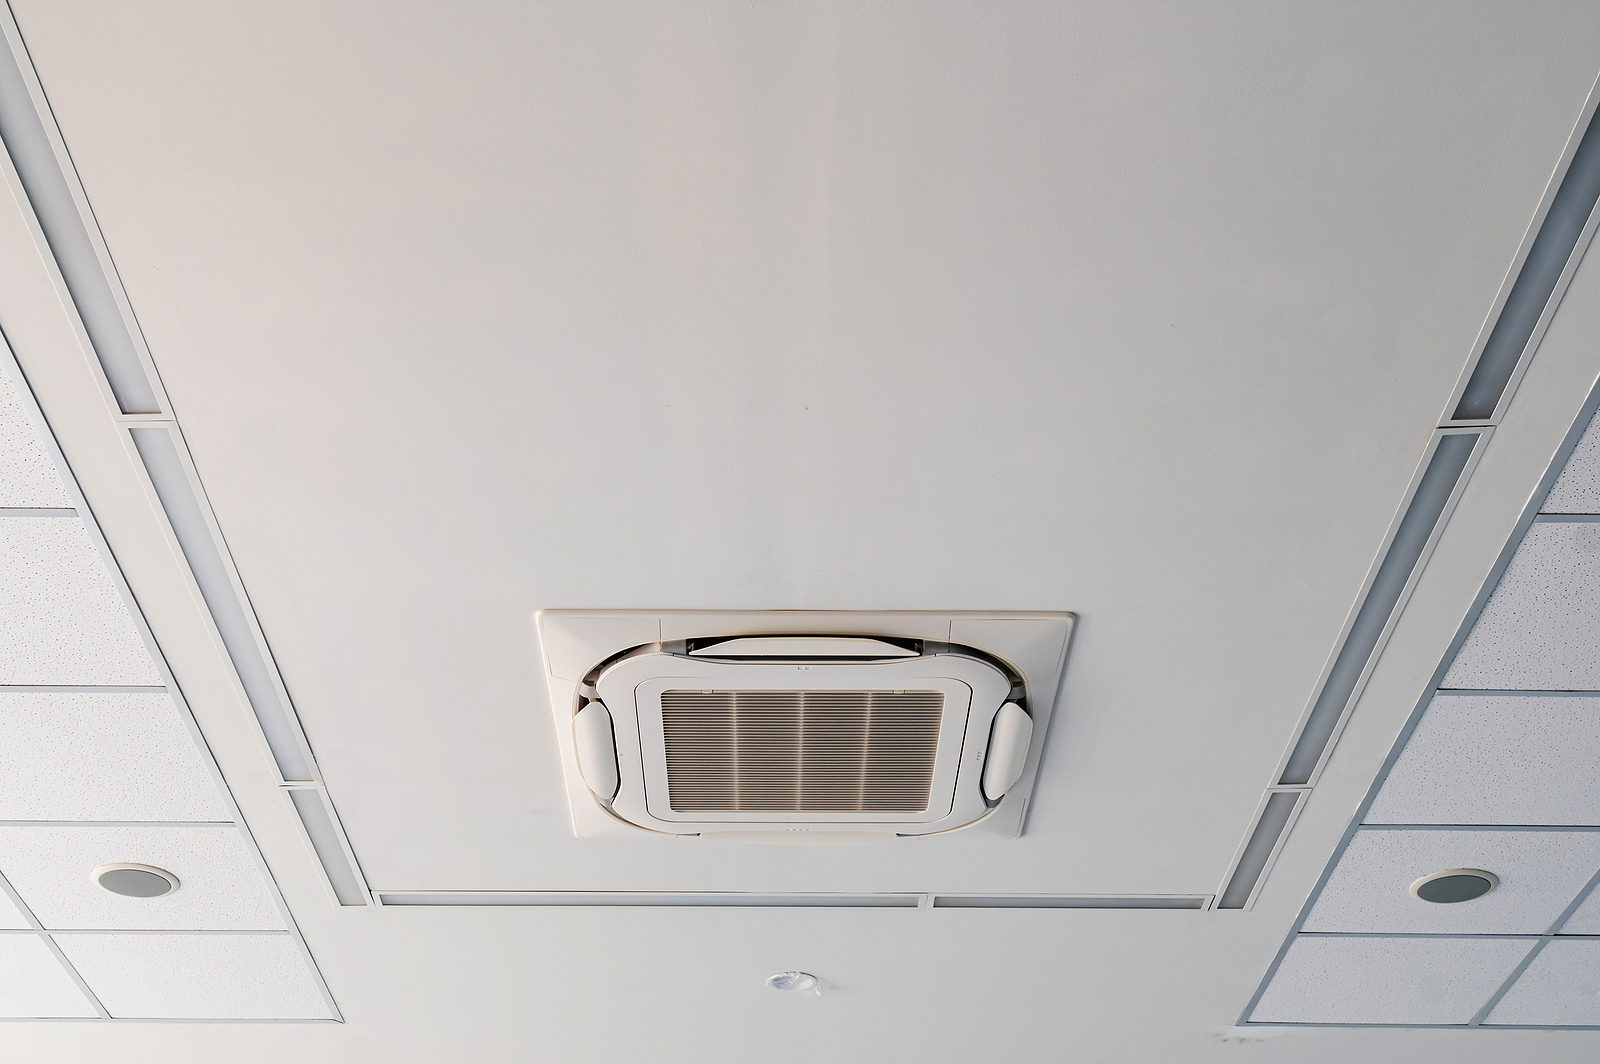 26 Ways to Fix Water Stains on Your Ceiling Air Conditioning Vents